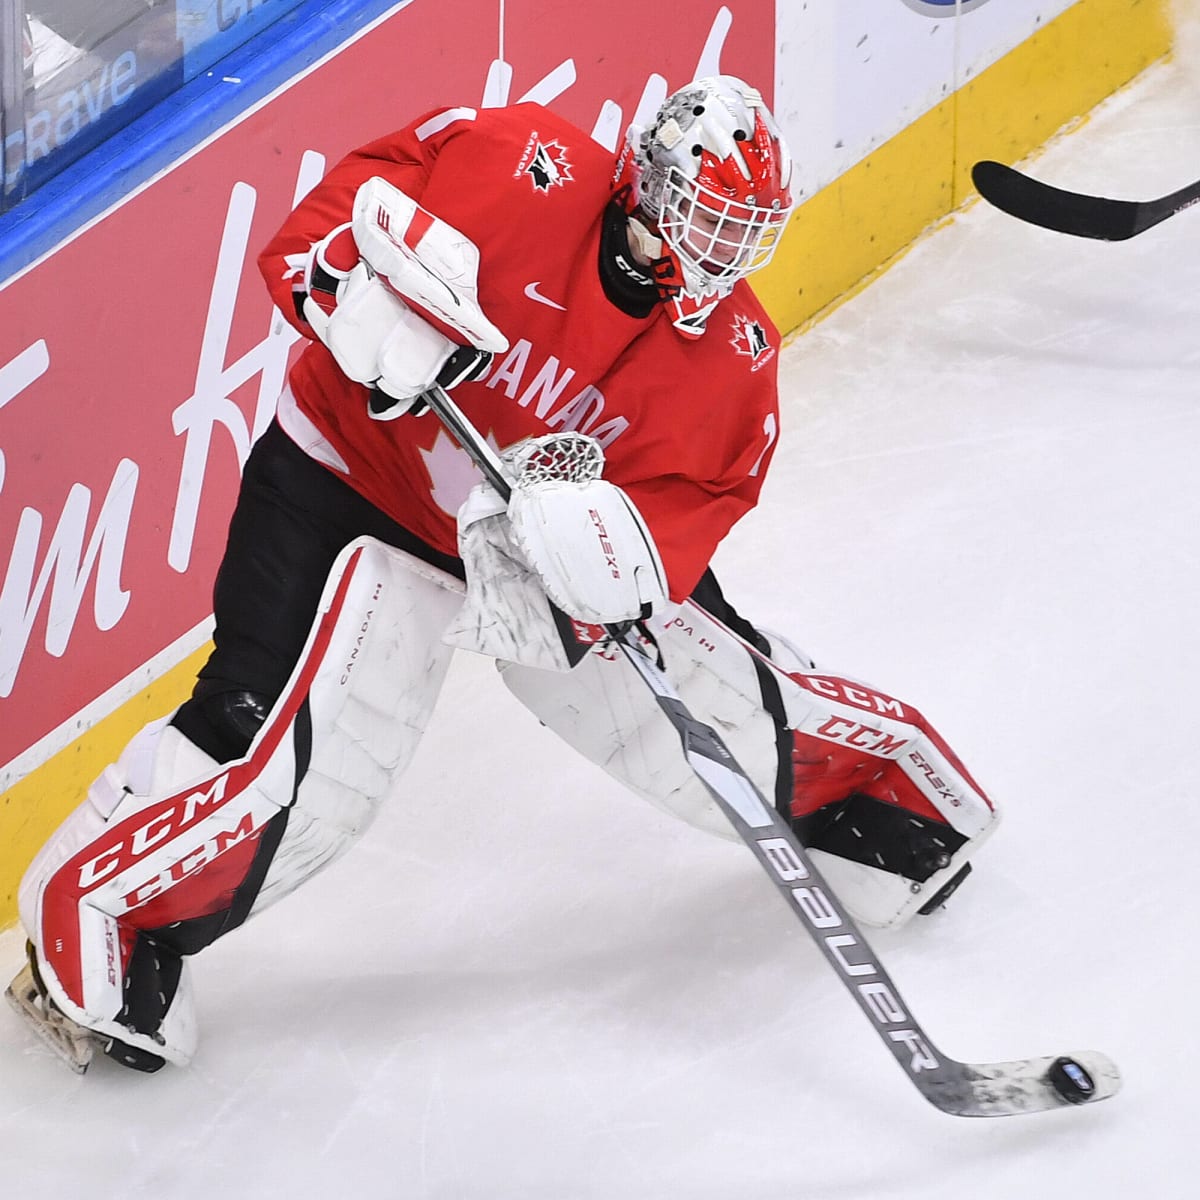 Watch Canada vs Czechia Stream World Juniors live, TV channel - How to Watch and Stream Major League and College Sports